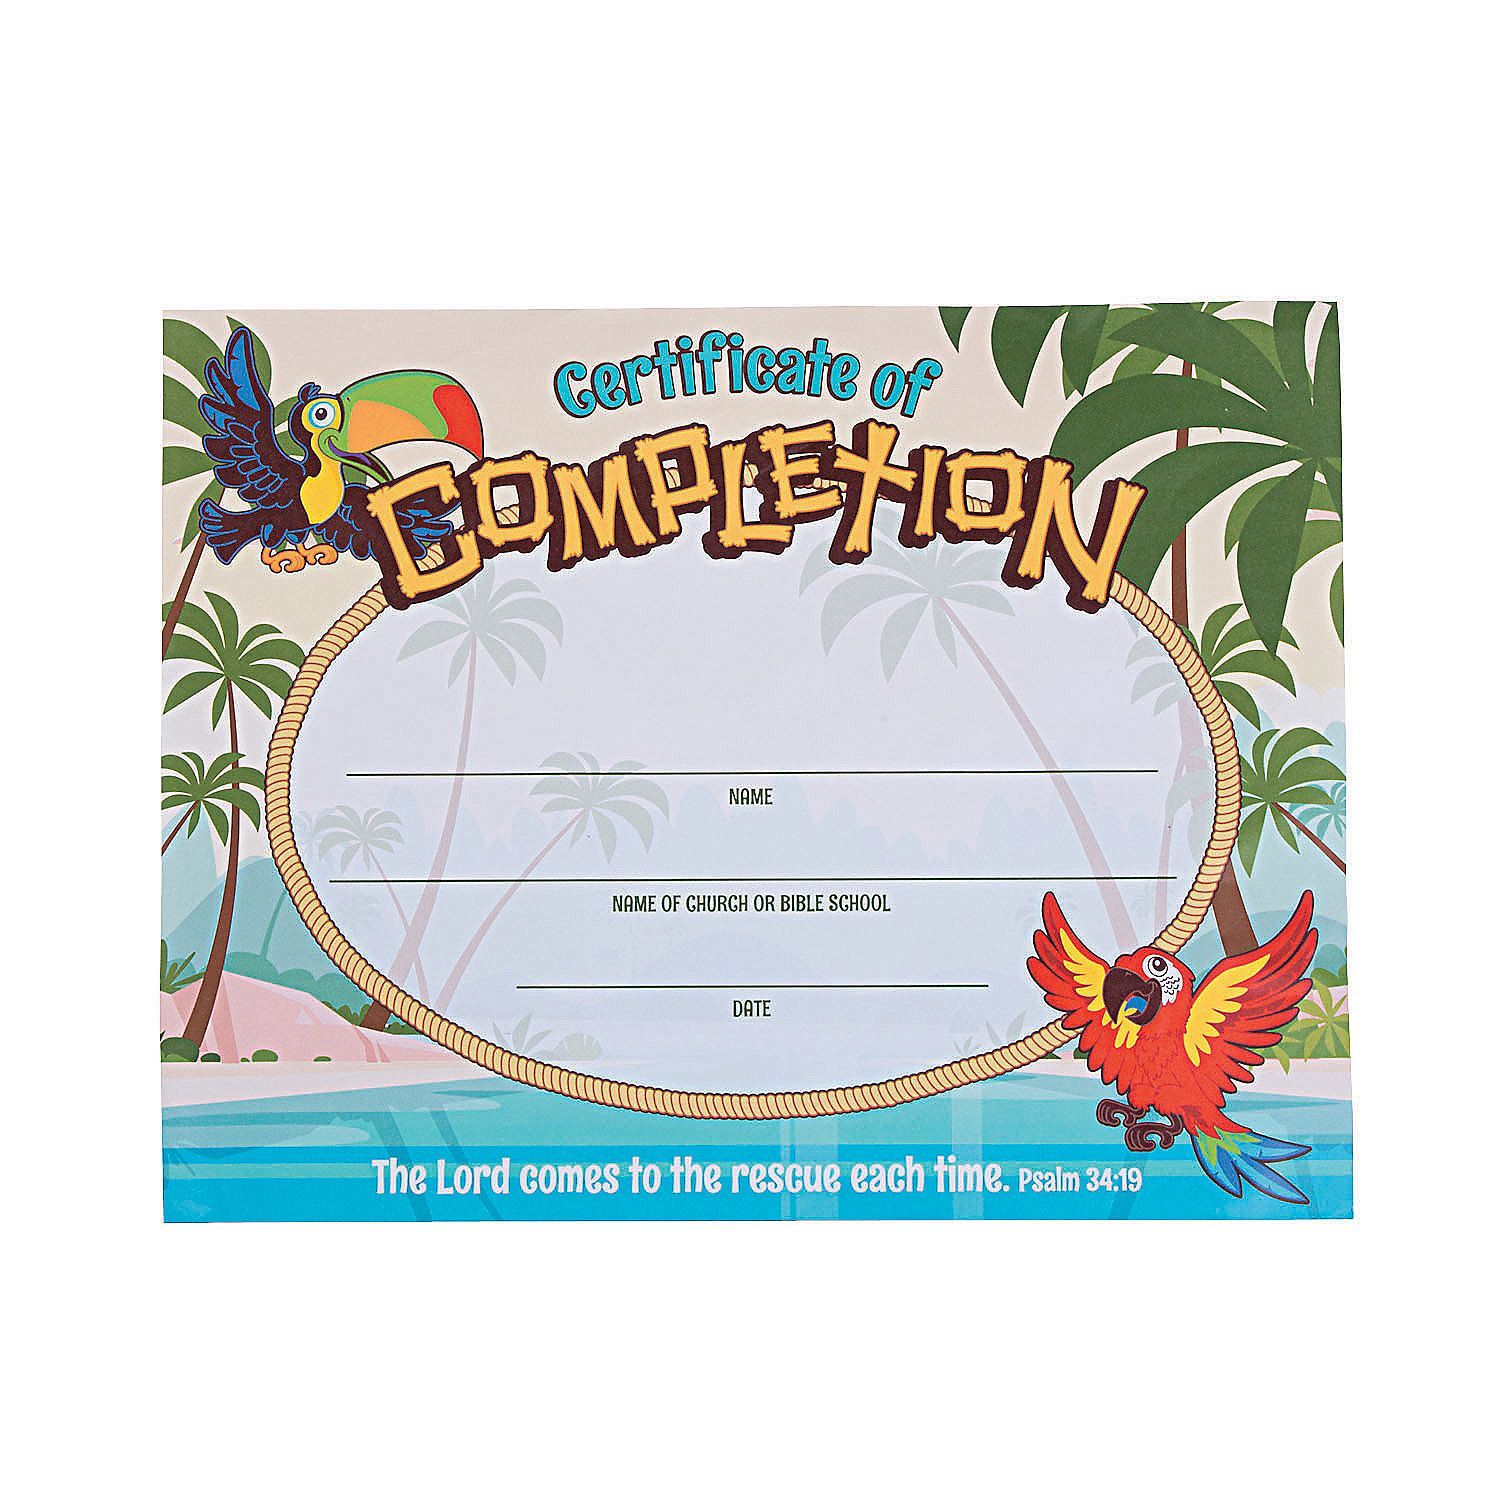 Island Vbs Certificates Of Completion | Certificate With Free Vbs Certificate Templates